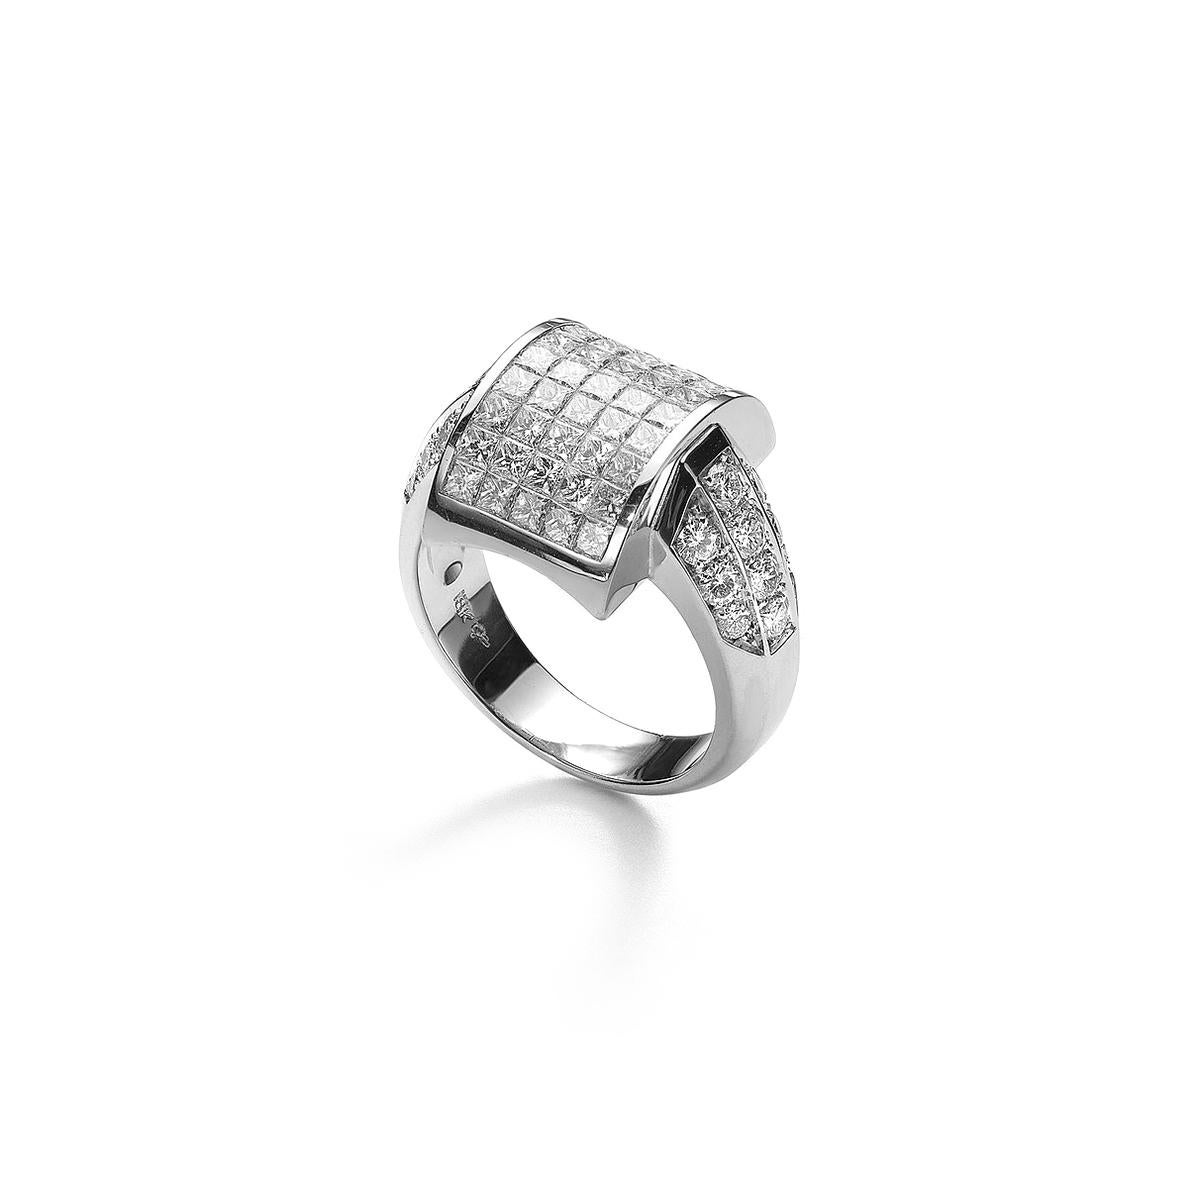 Ring in 18kt white gold set with 45 princess cut diamonds1.79 cts and 20 diamonds 0.73 cts Size 55            